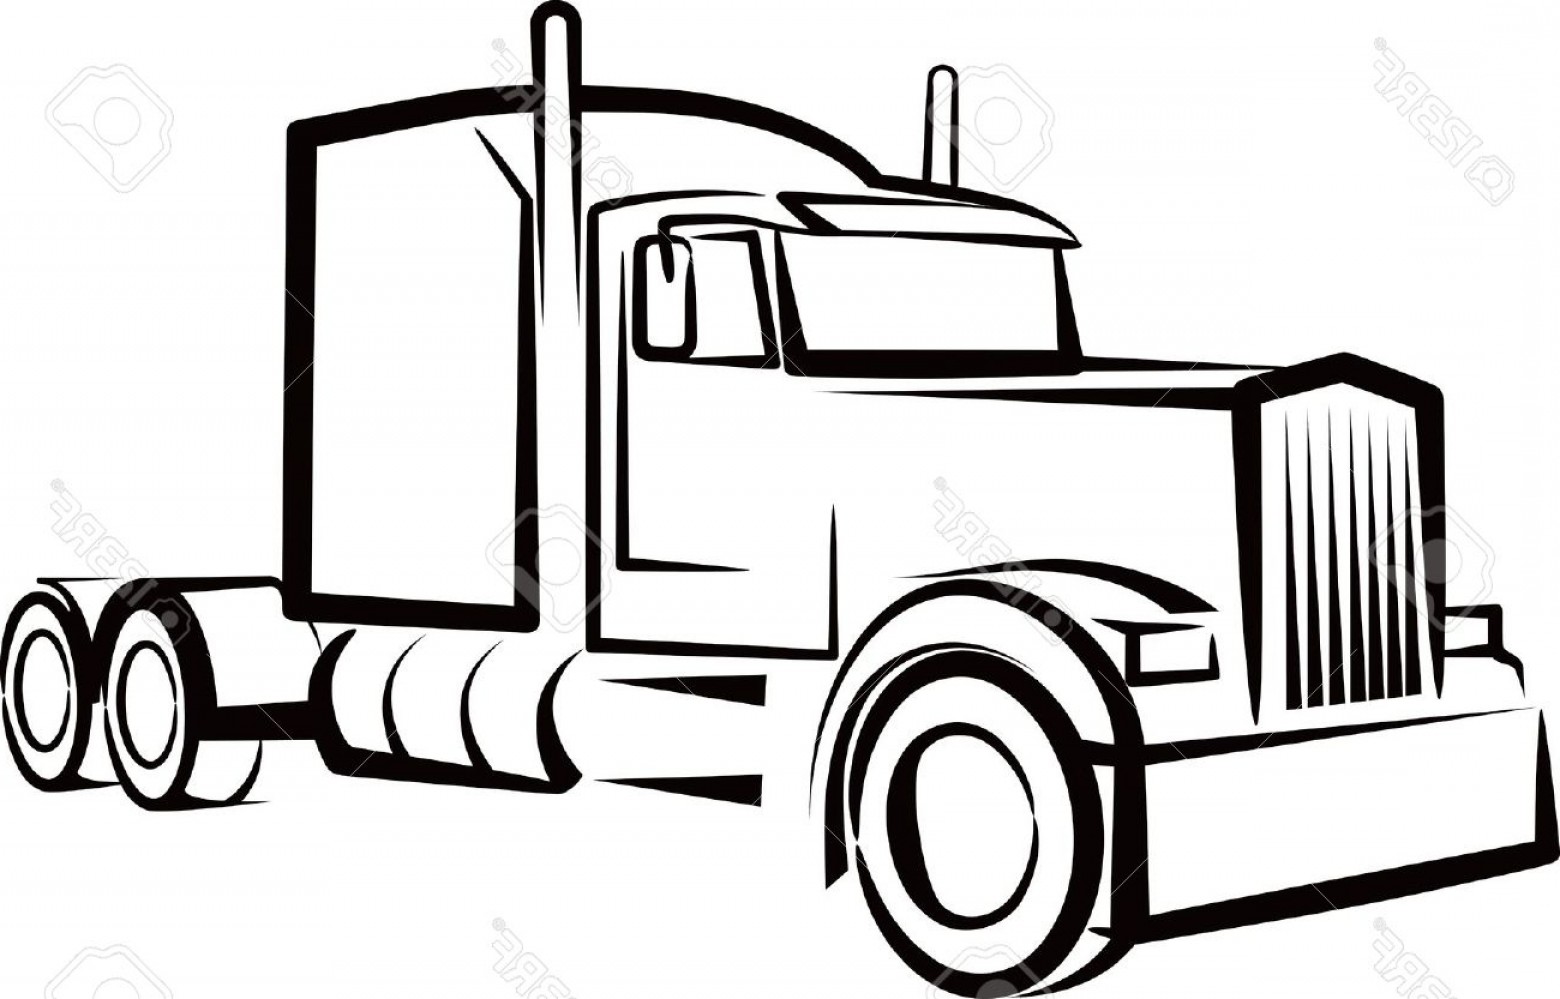 Semi Truck Line Drawing at PaintingValley.com.